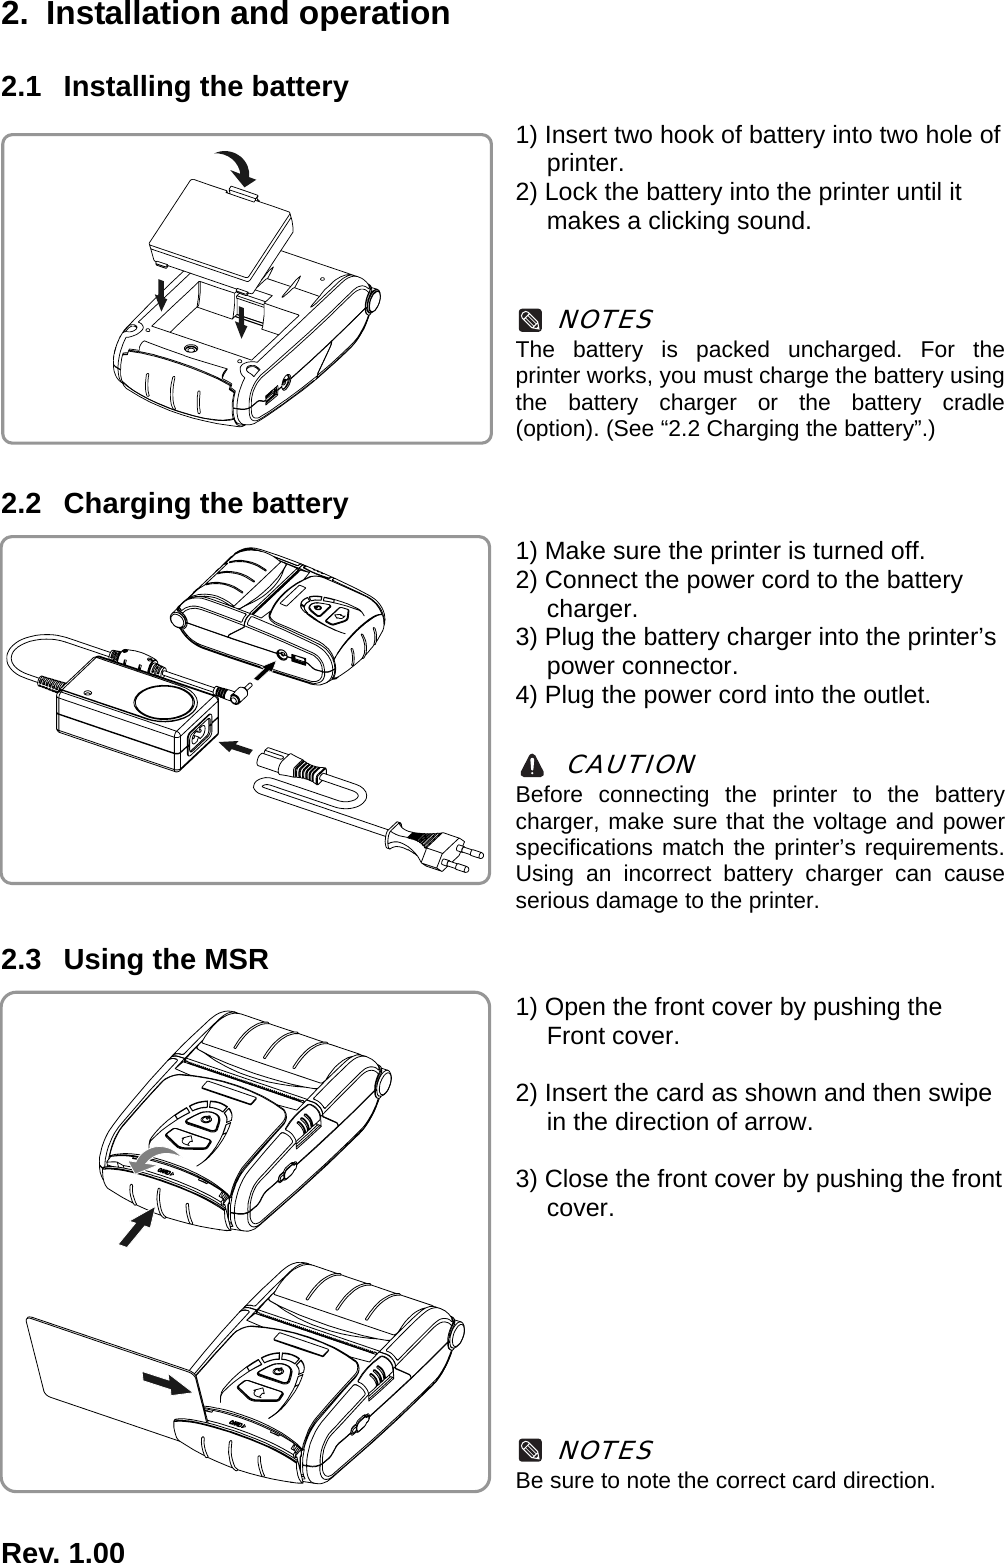  Rev. 1.00  2.  Installation and operation 2.1  Installing the battery 1) Insert two hook of battery into two hole of printer. 2) Lock the battery into the printer until it makes a clicking sound.    NOTES The battery is packed uncharged. For the printer works, you must charge the battery using the battery charger or the battery cradle (option). (See “2.2 Charging the battery”.)  2.2  Charging the battery 1) Make sure the printer is turned off. 2) Connect the power cord to the battery charger. 3) Plug the battery charger into the printer’s power connector. 4) Plug the power cord into the outlet.   CAUTION Before connecting the printer to the battery charger, make sure that the voltage and power specifications match the printer’s requirements. Using an incorrect battery charger can cause serious damage to the printer.  2.3  Using the MSR 1) Open the front cover by pushing the Front cover.  2) Insert the card as shown and then swipe in the direction of arrow.  3) Close the front cover by pushing the front cover.         NOTES Be sure to note the correct card direction.   